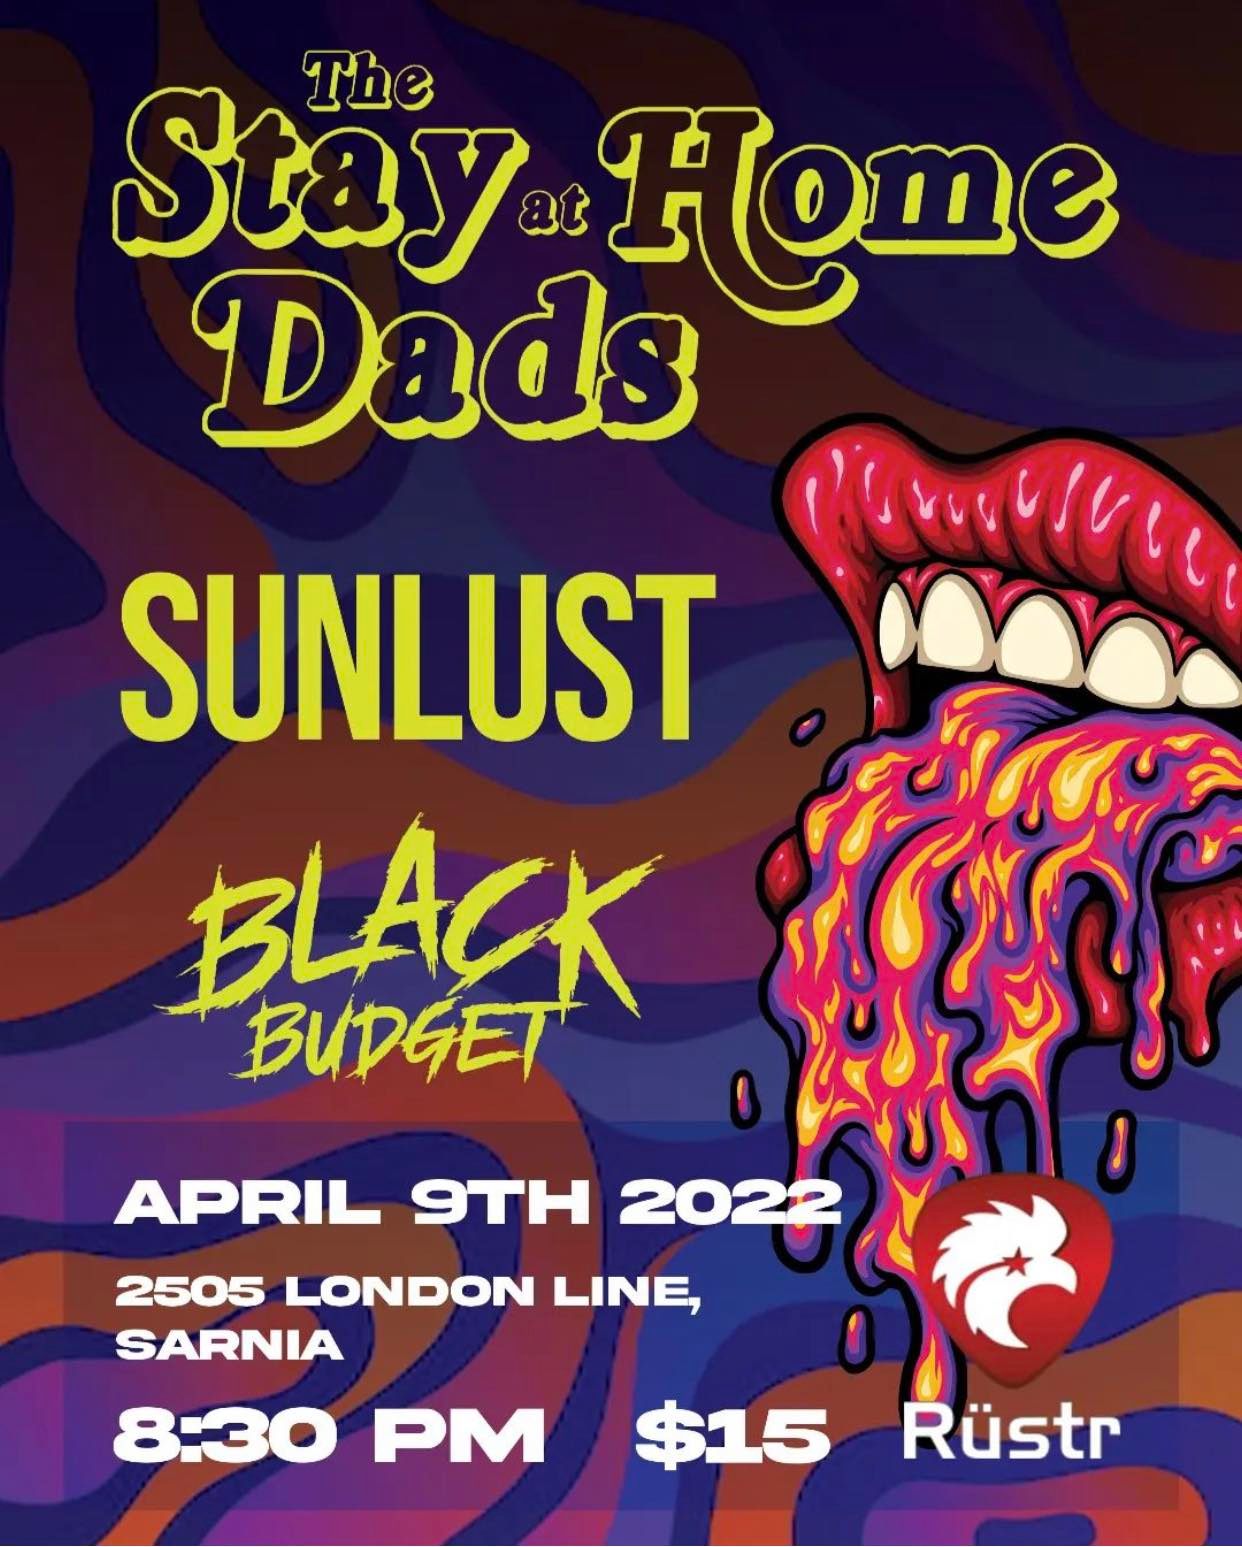 Stay at Home Dads wsg Sunlust & Black Budget